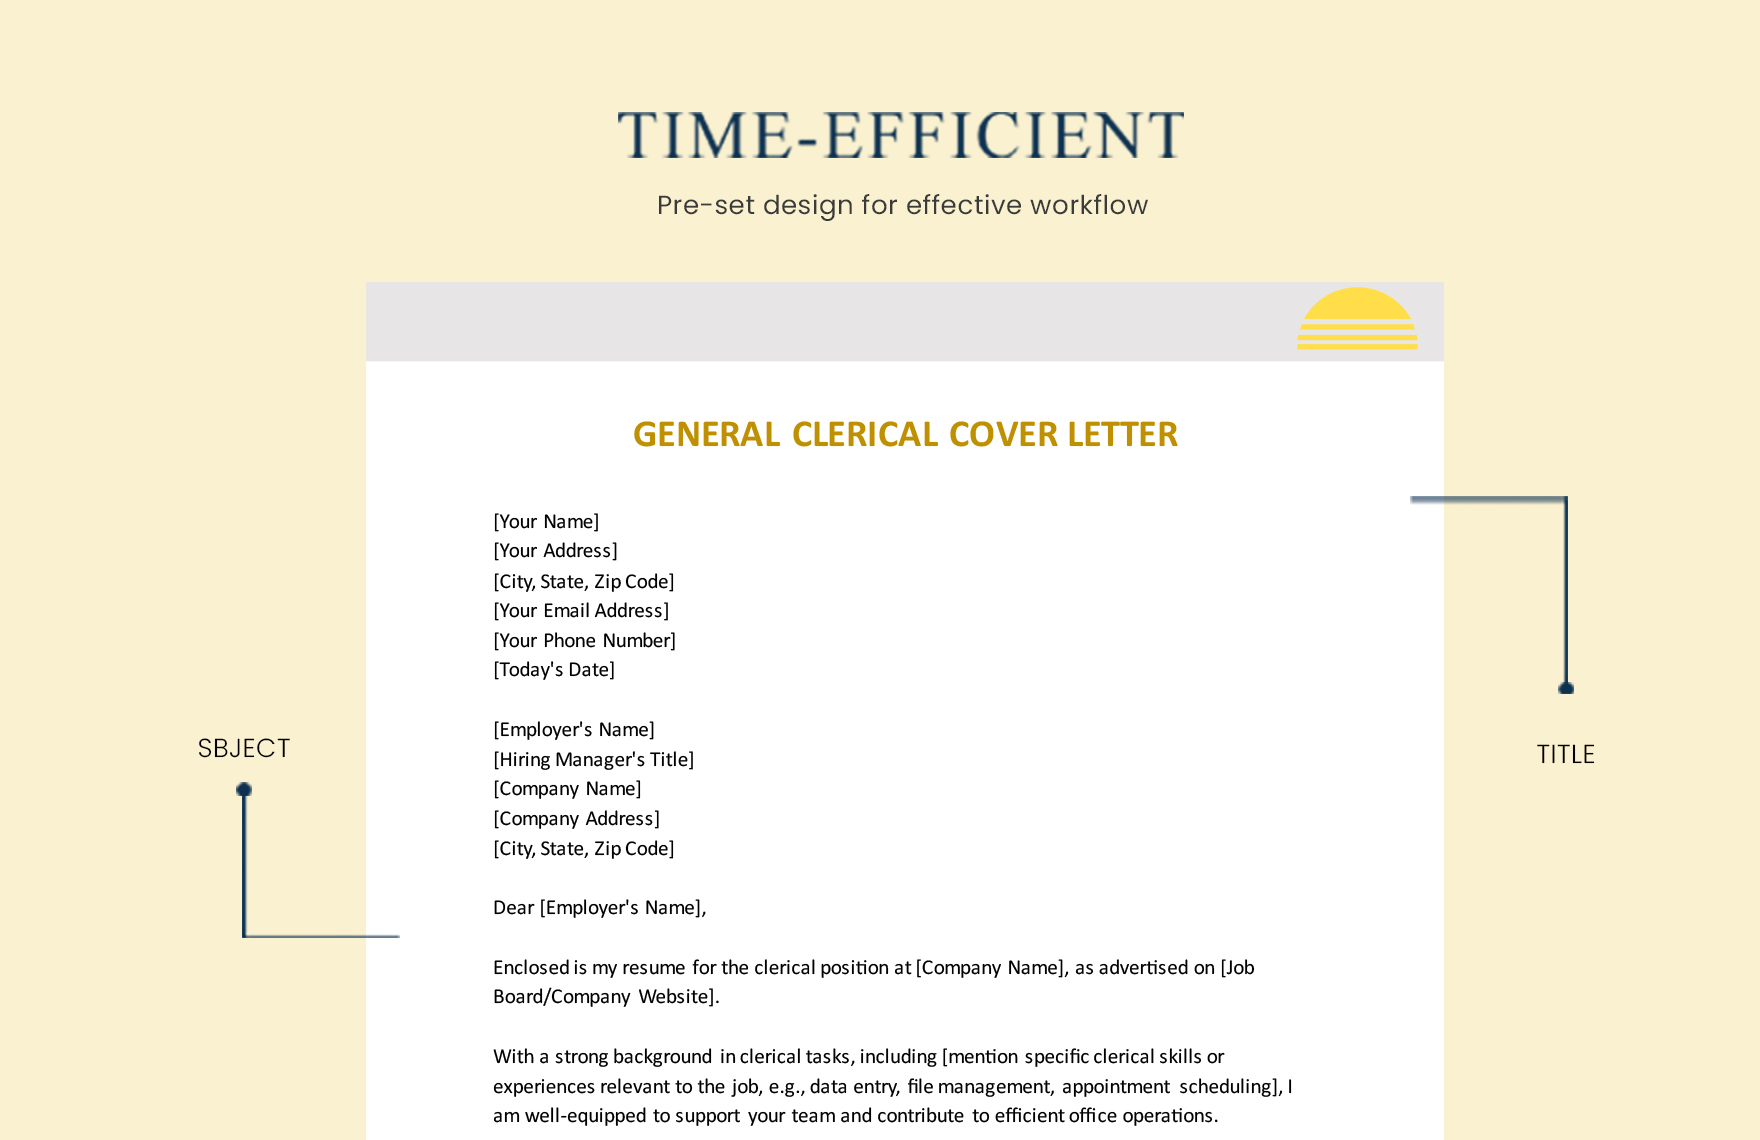 General Clerical Cover Letter